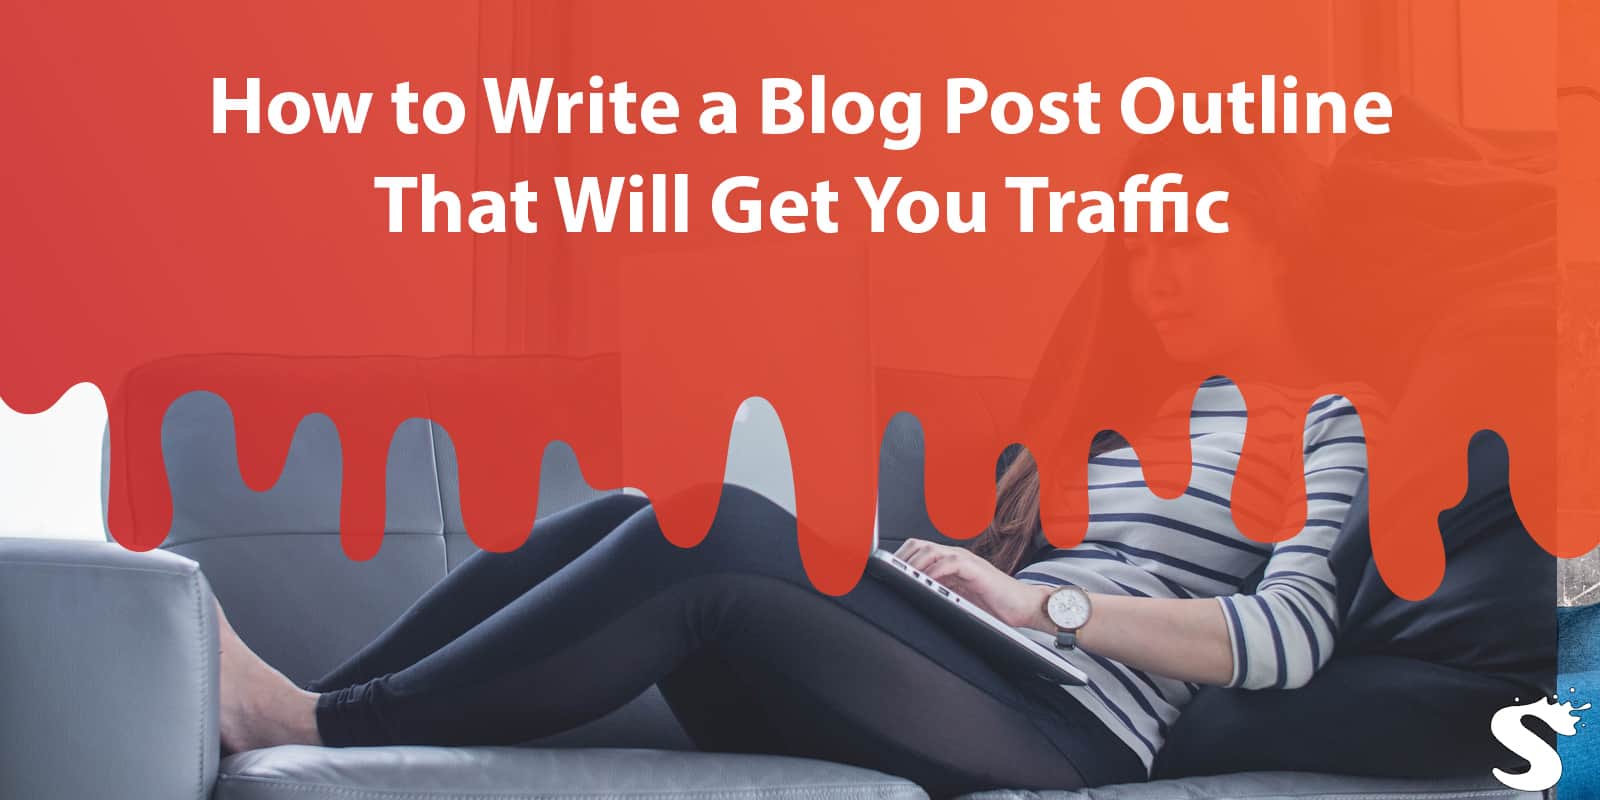 How to Write a Blog Post Outline That Will Get You Traffic